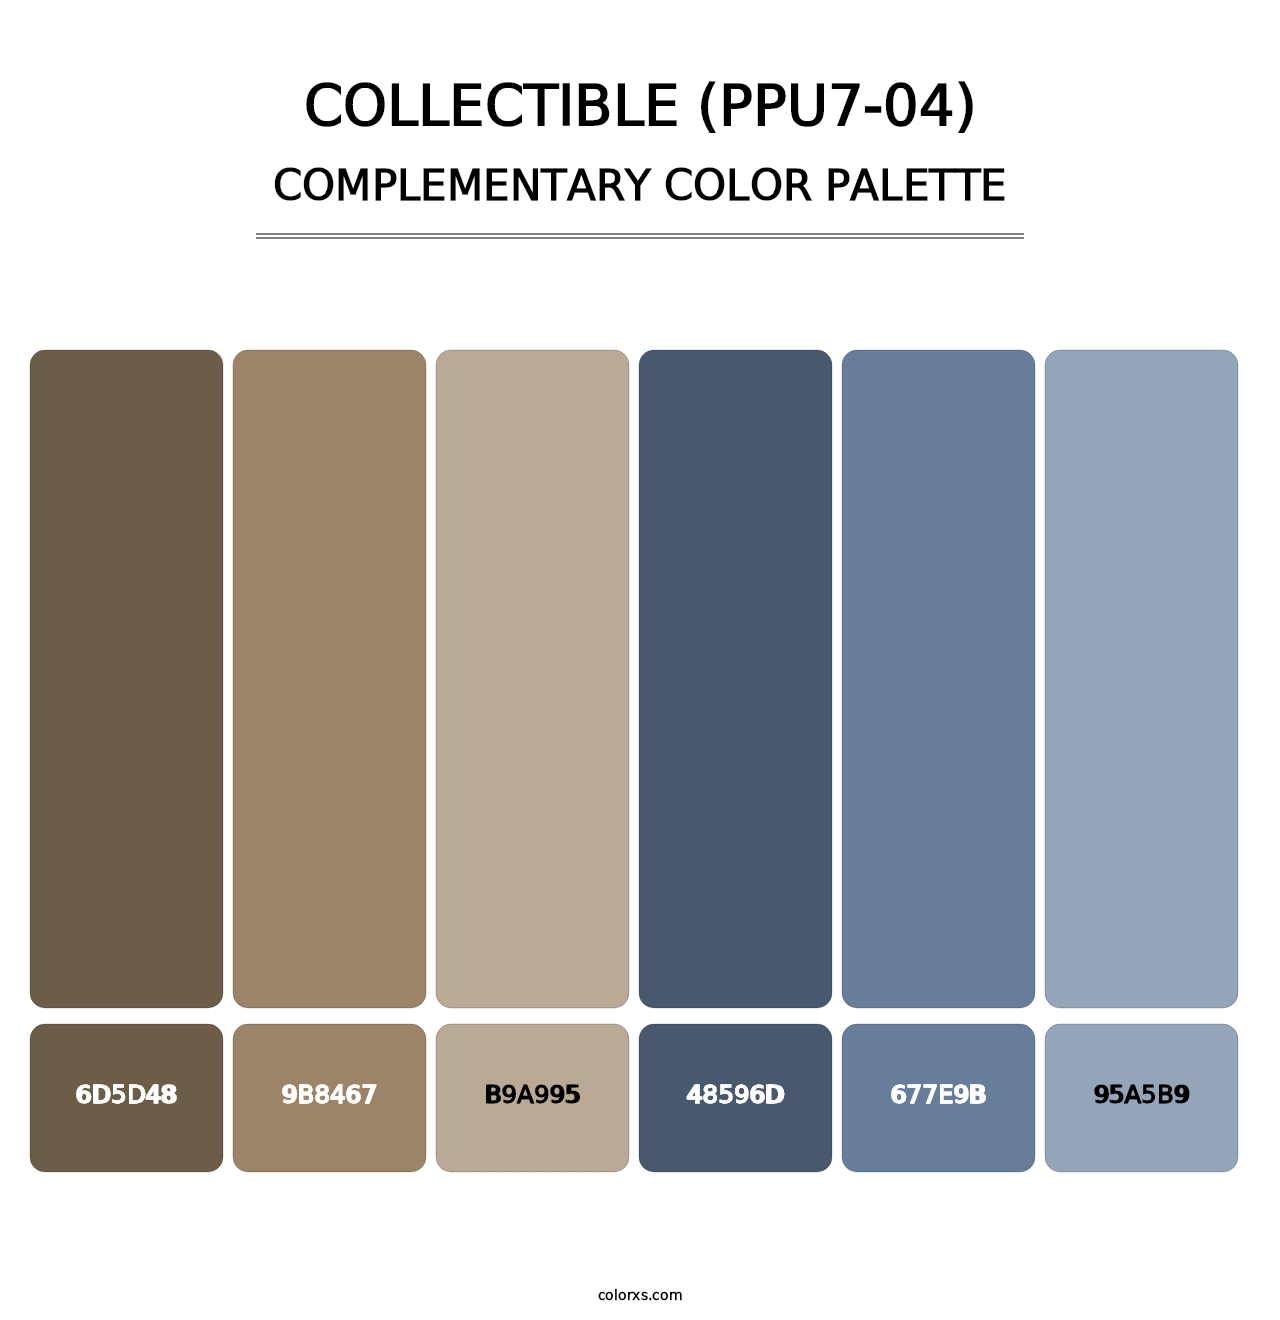 Collectible (PPU7-04) - Complementary Color Palette